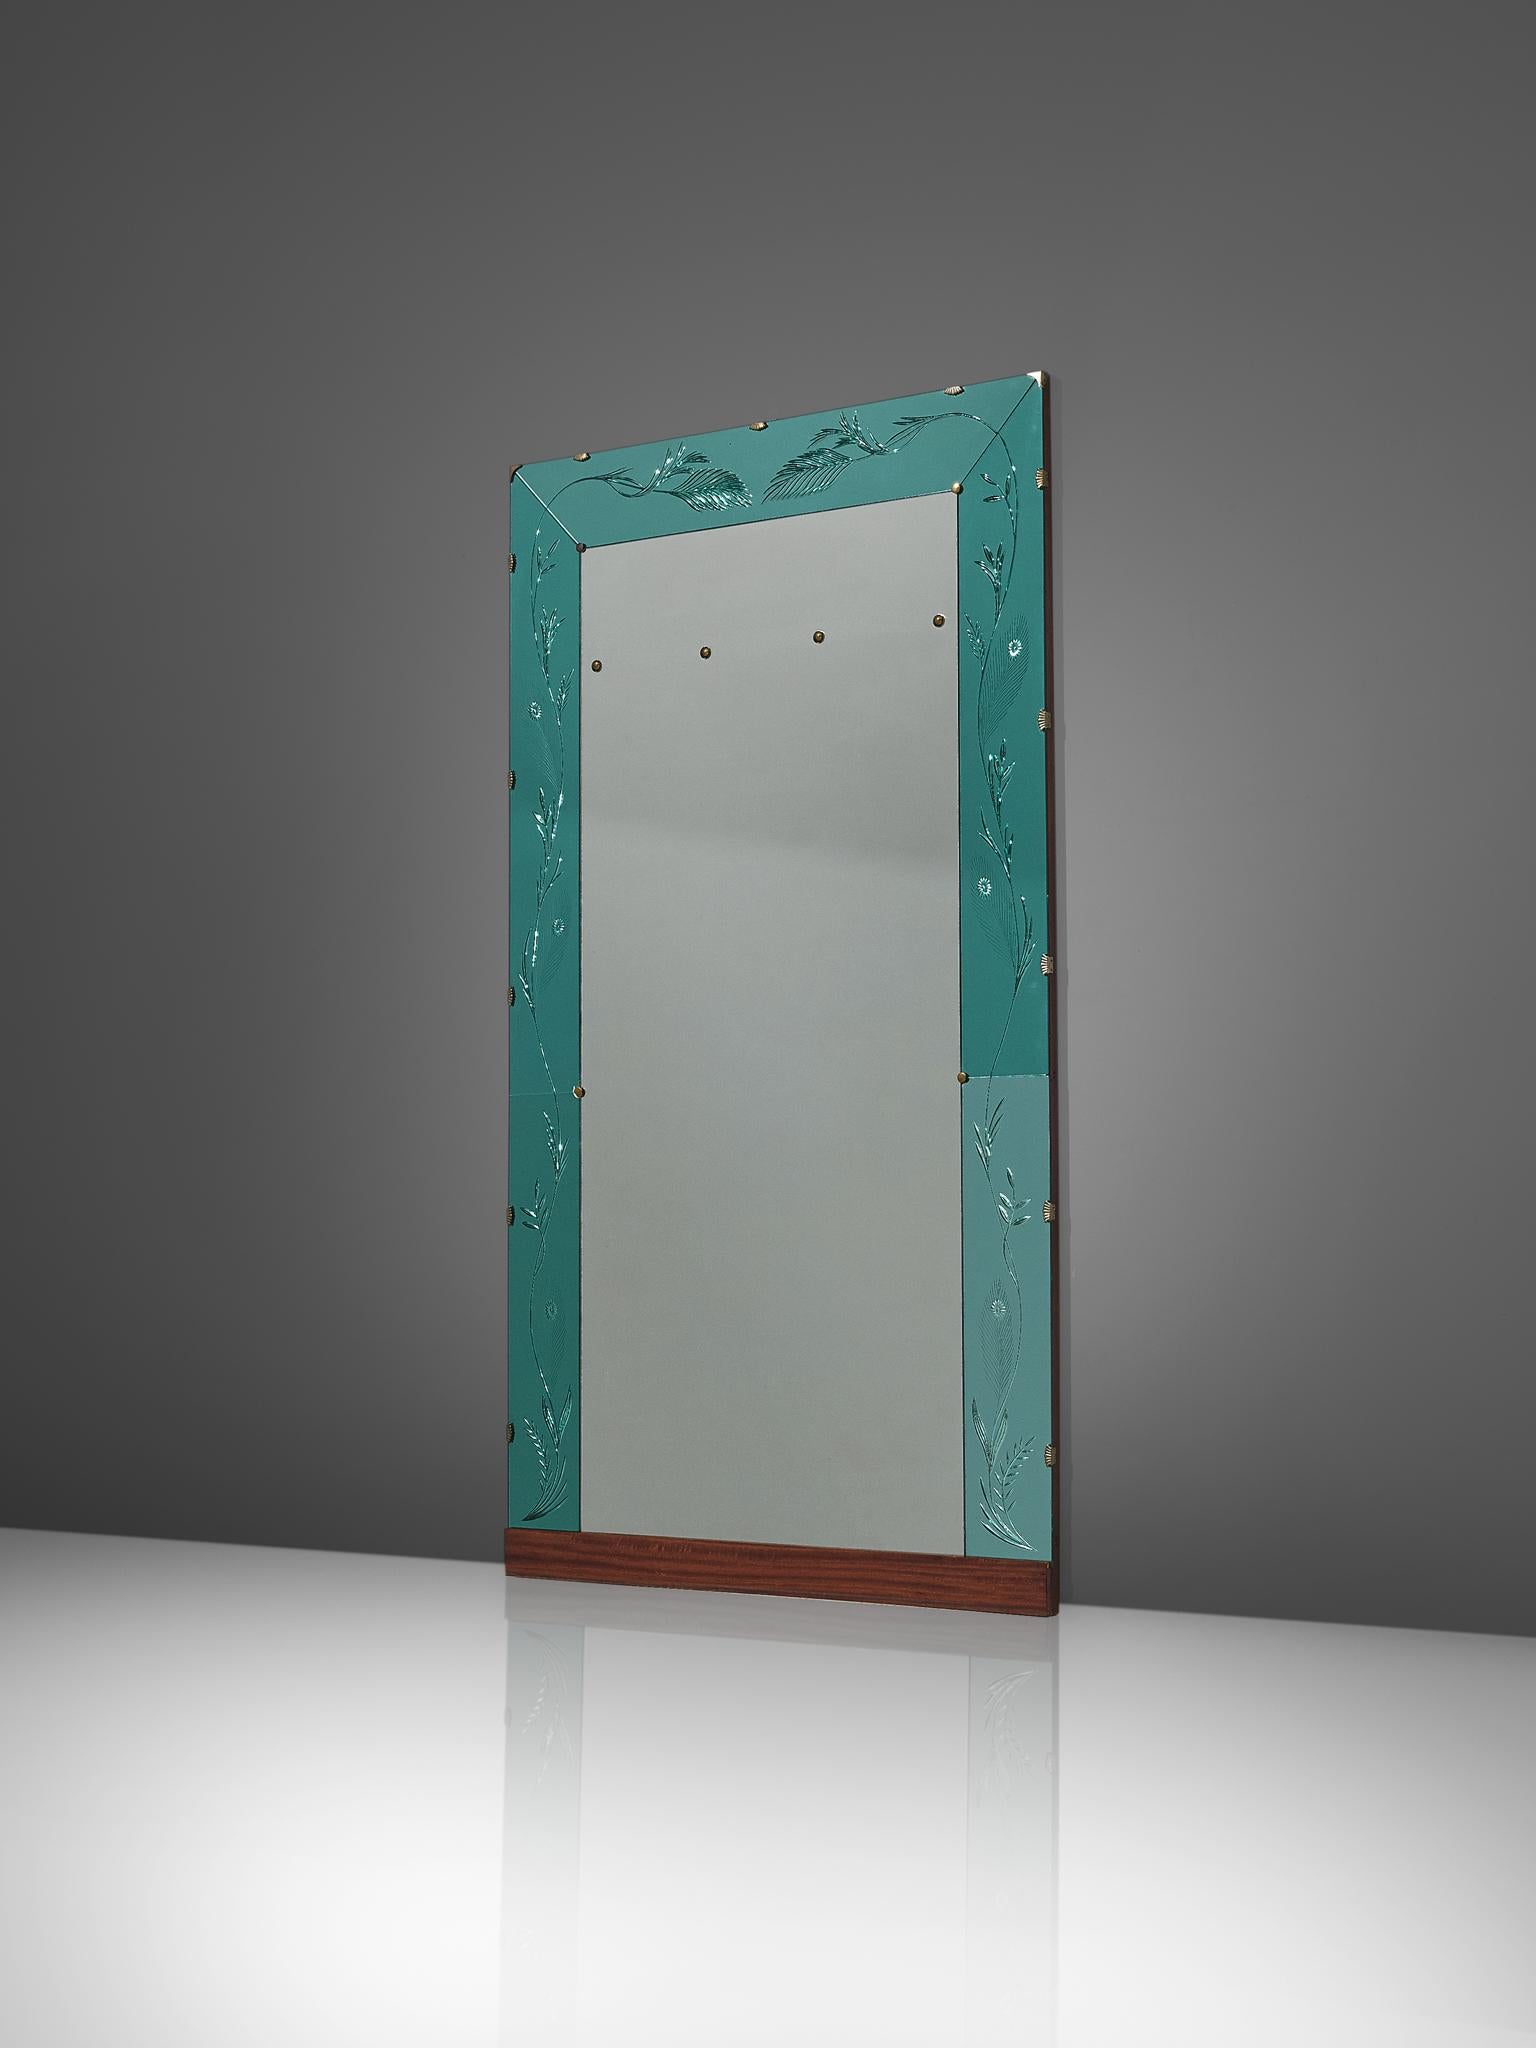 Wall mounted mirror, glass, brass, mahogany, walnut, Italy, 1950s.

An elegant Italian wall-mounted mirror in two tones. The mirror is framed by a turquoise glass frame, supported by brass elements. The turquoise glass frame is engraved with